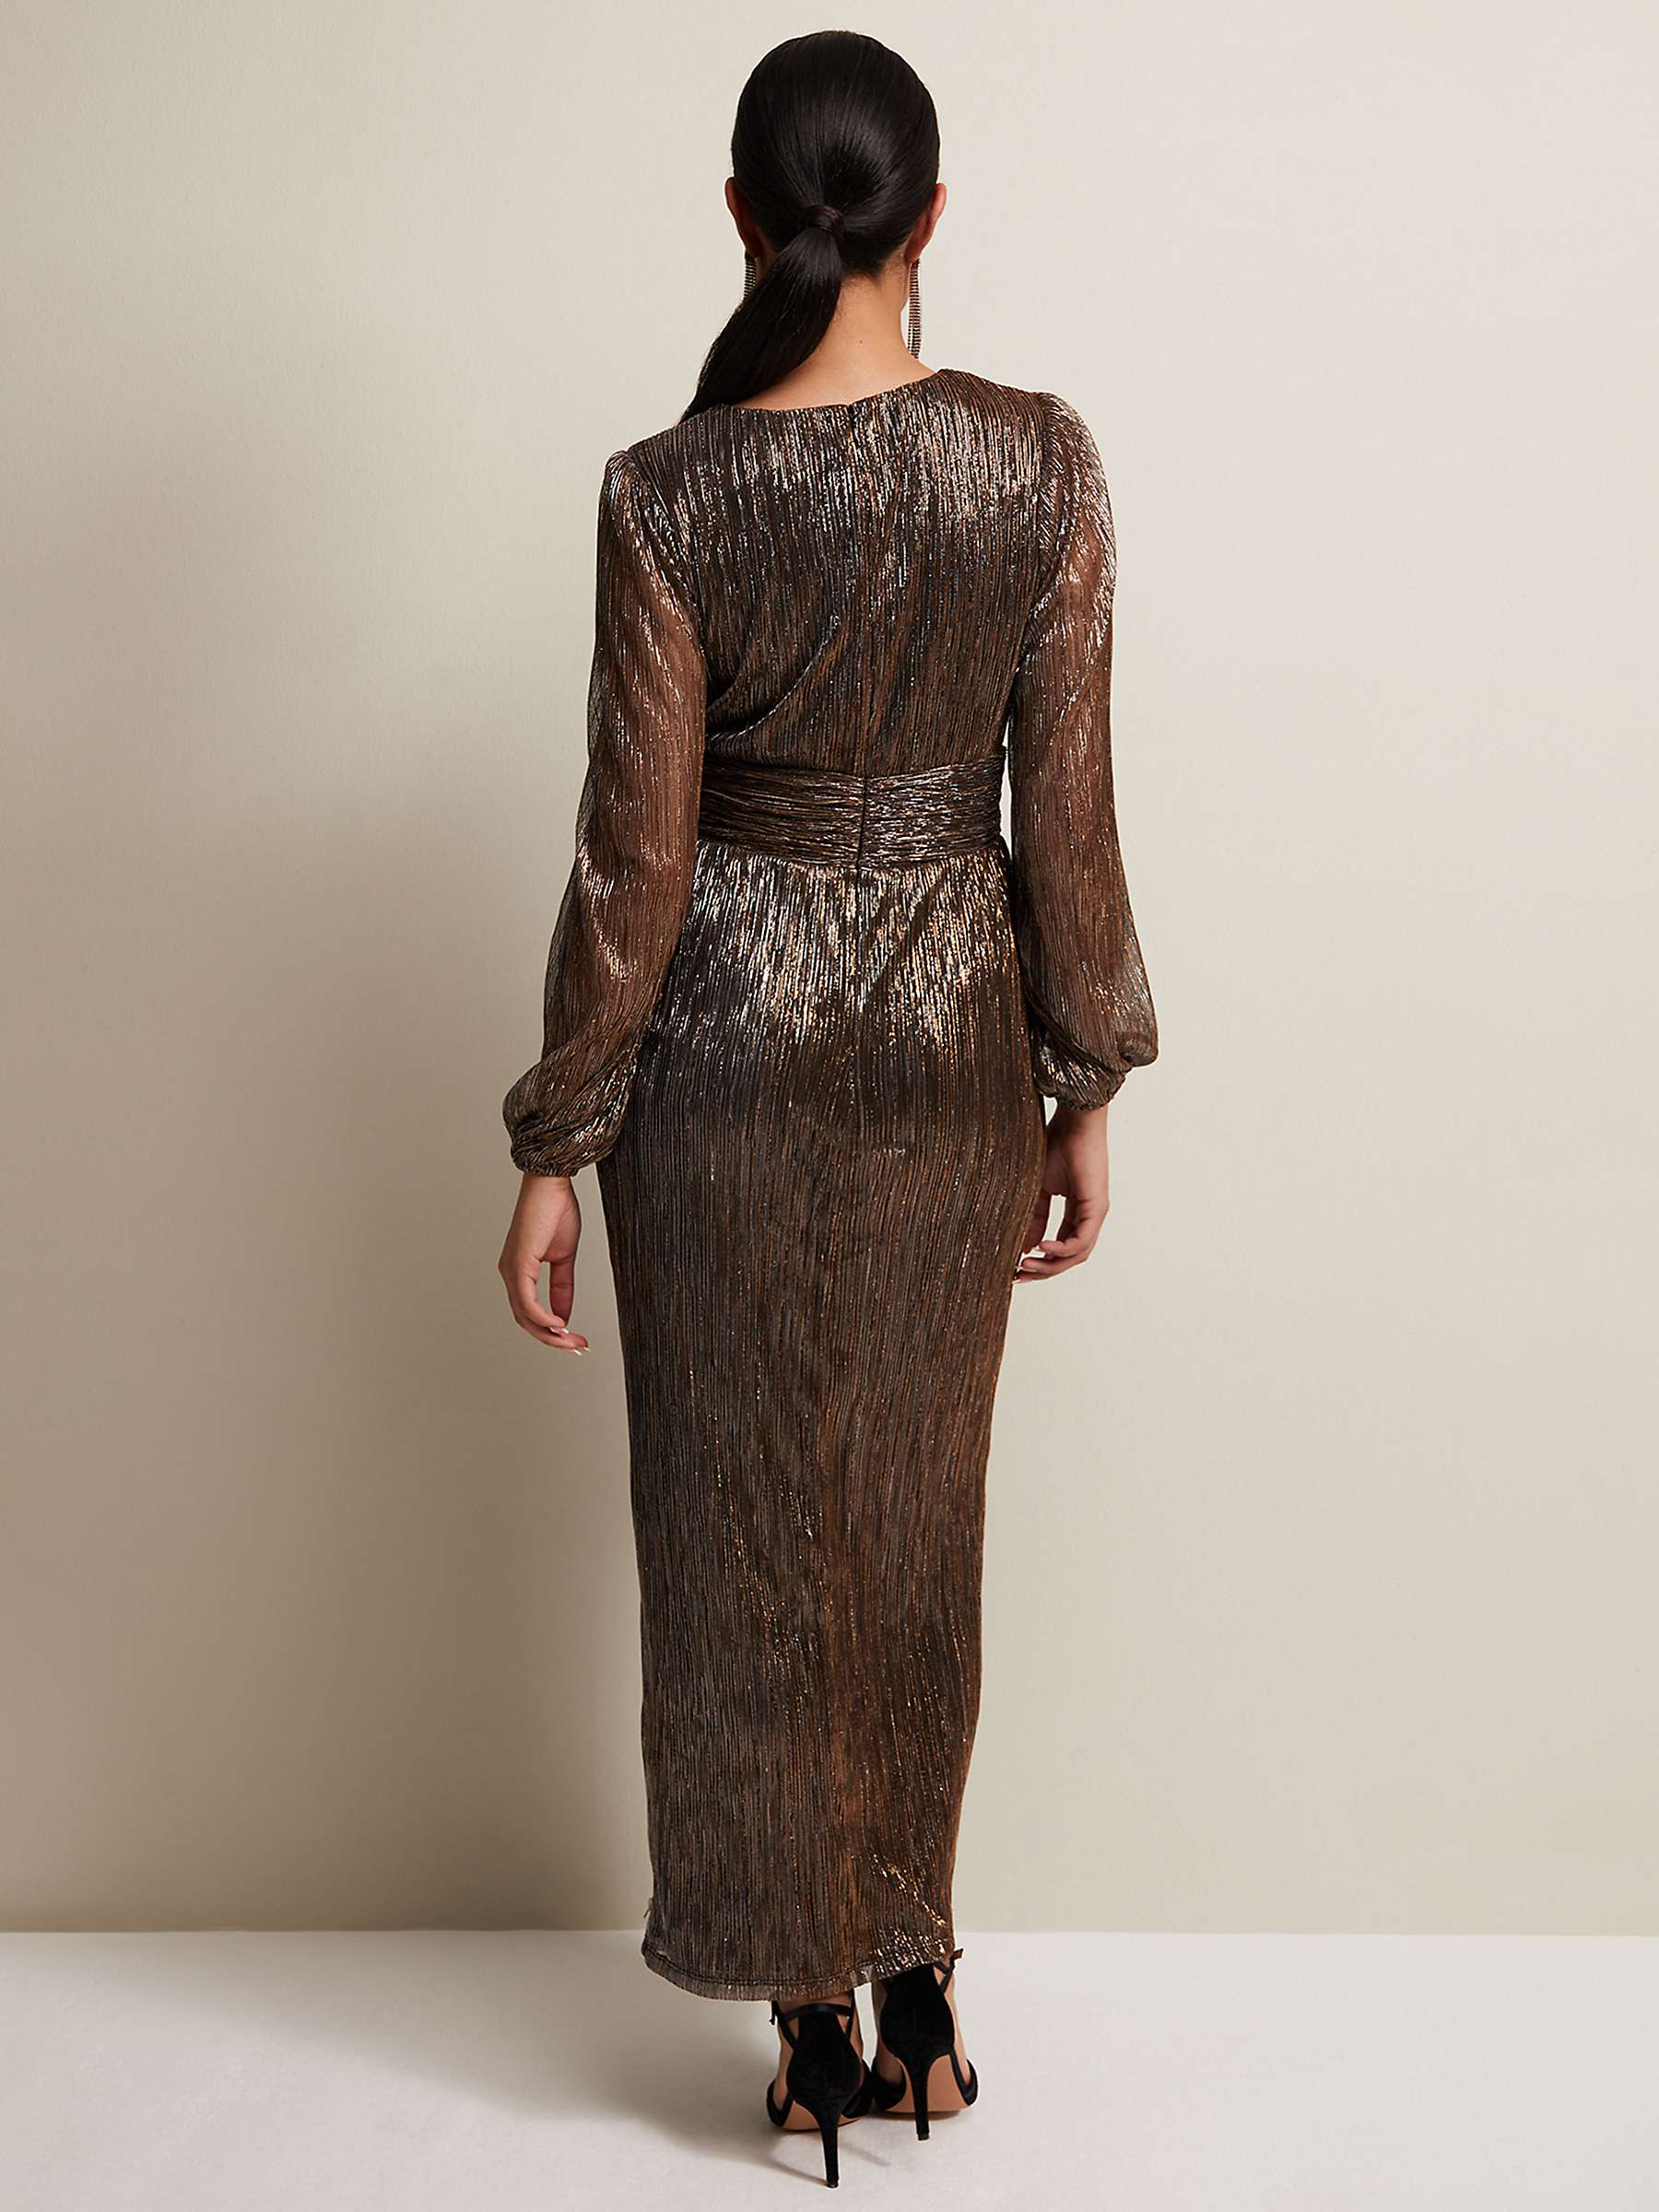 Buy Phase Eight Petite Brielle Shimmer Maxi Dress, Bronze Online at johnlewis.com